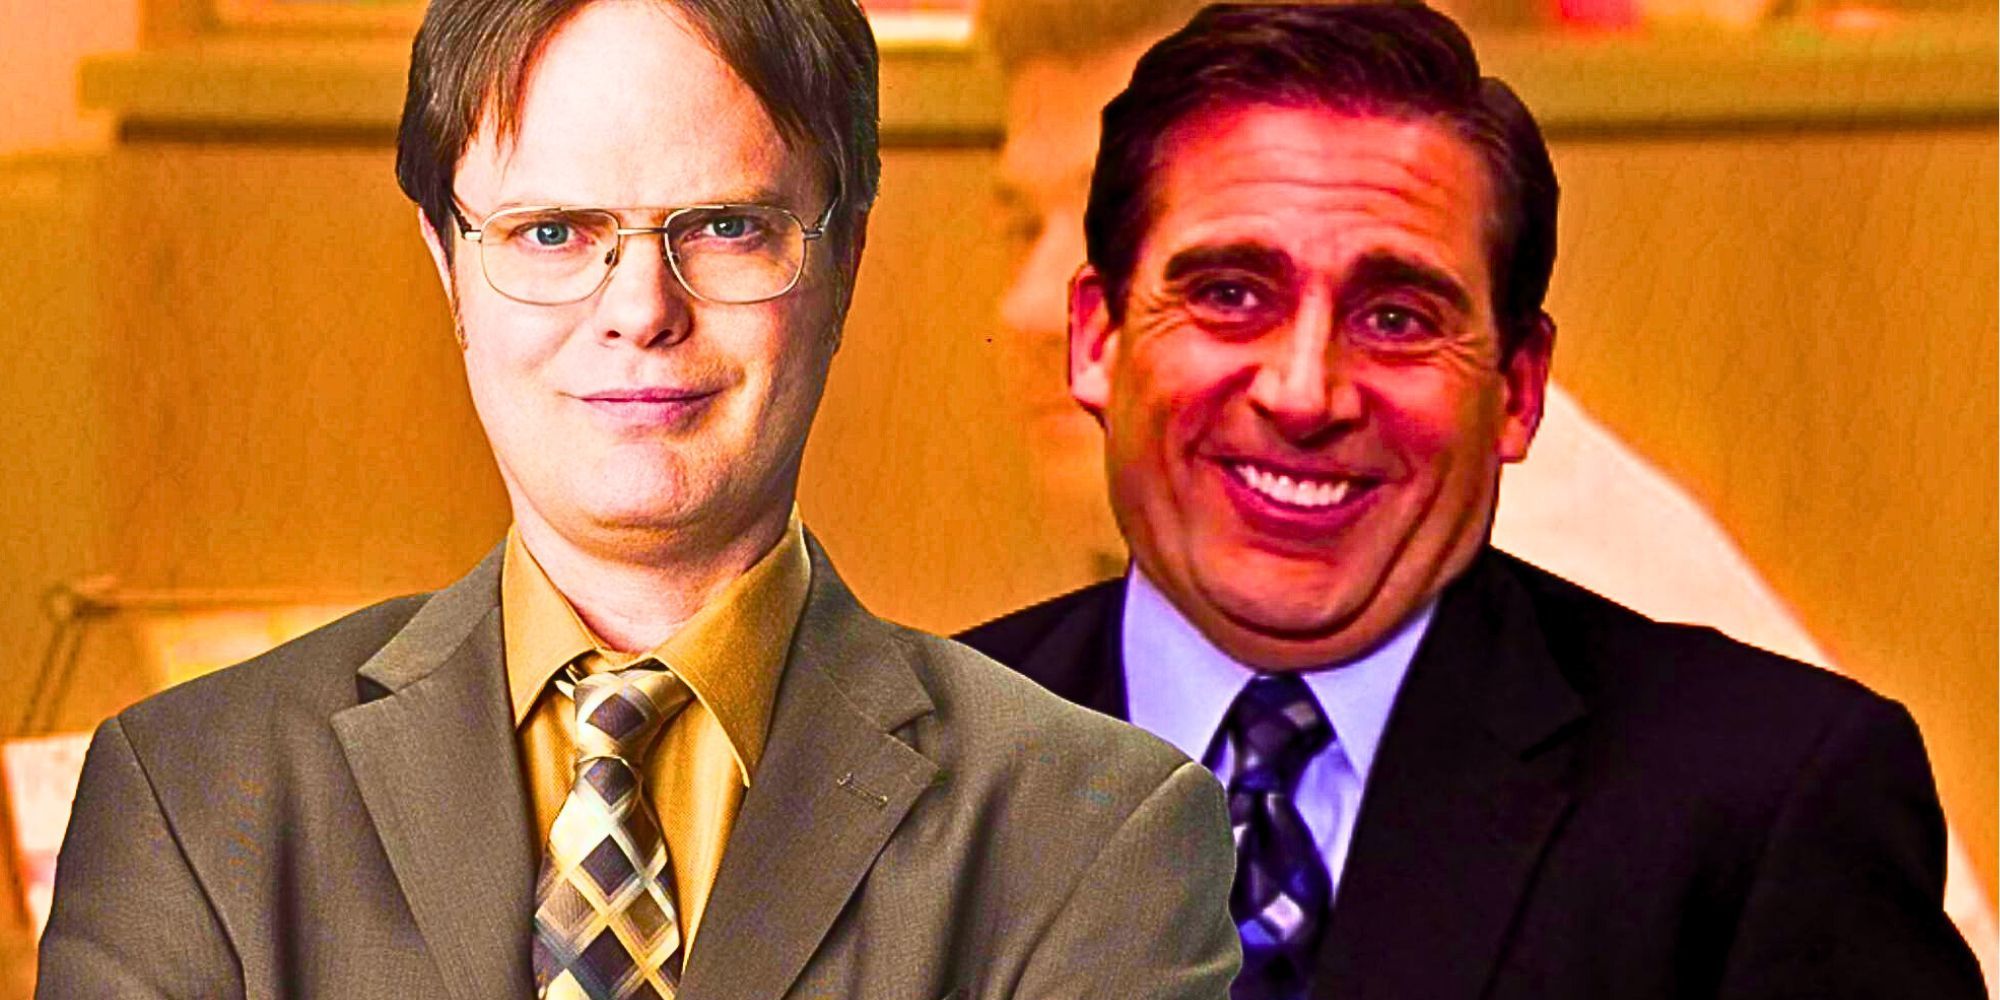 A custom image of various characters from The Office